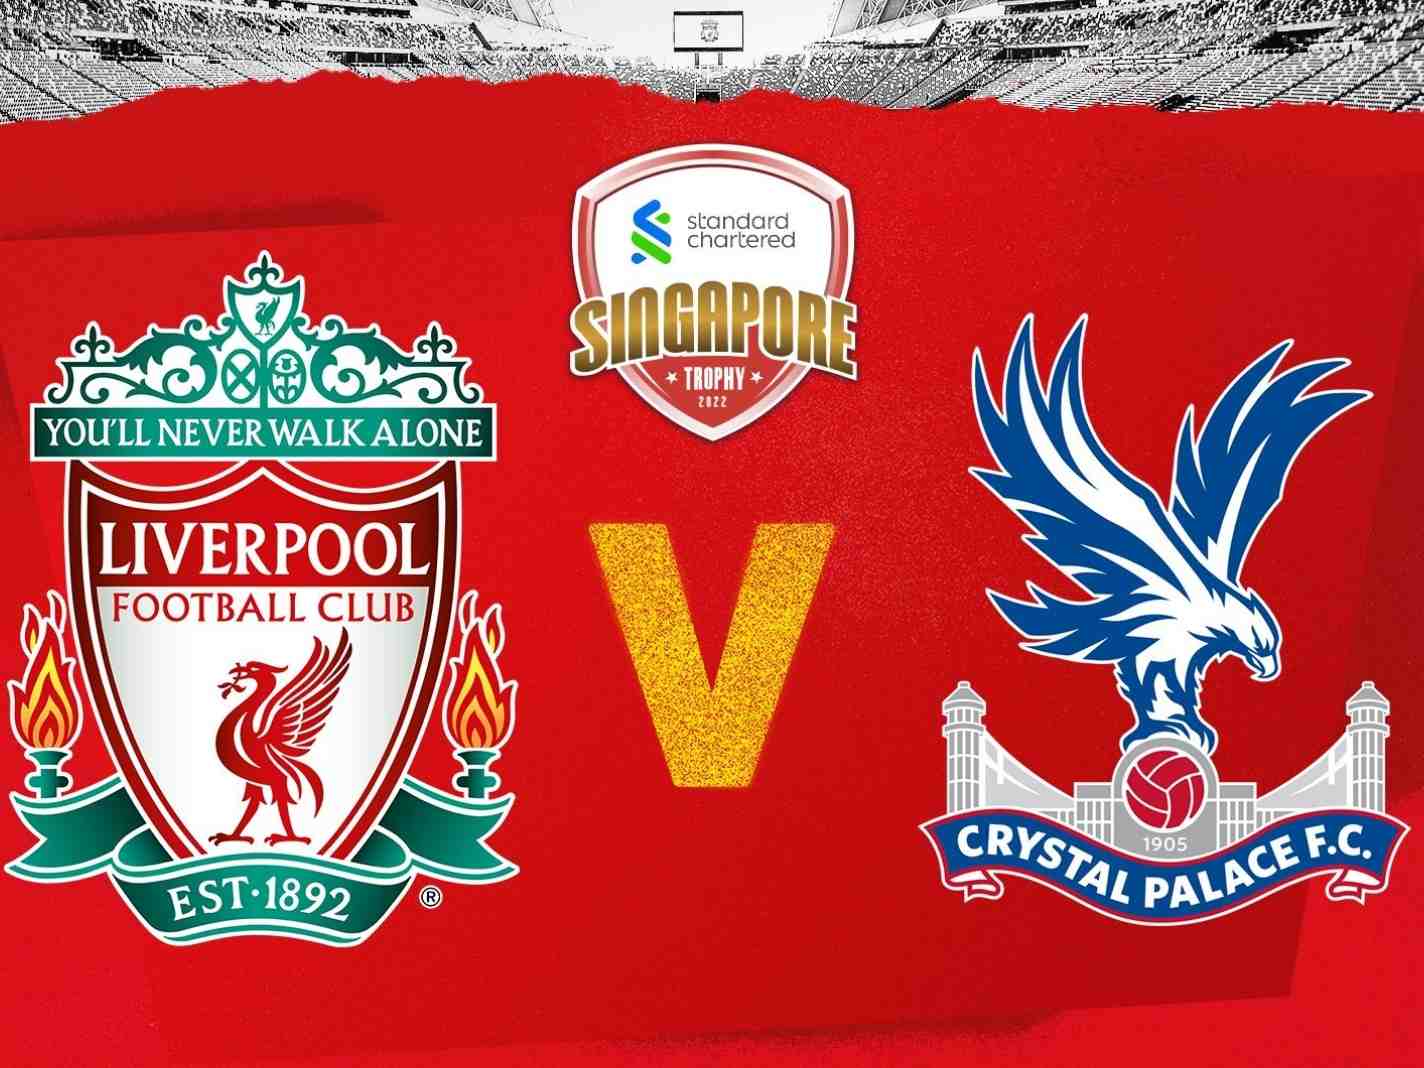 Liverpool will play against Crystal Palace in a pre-season friendly in Singapore